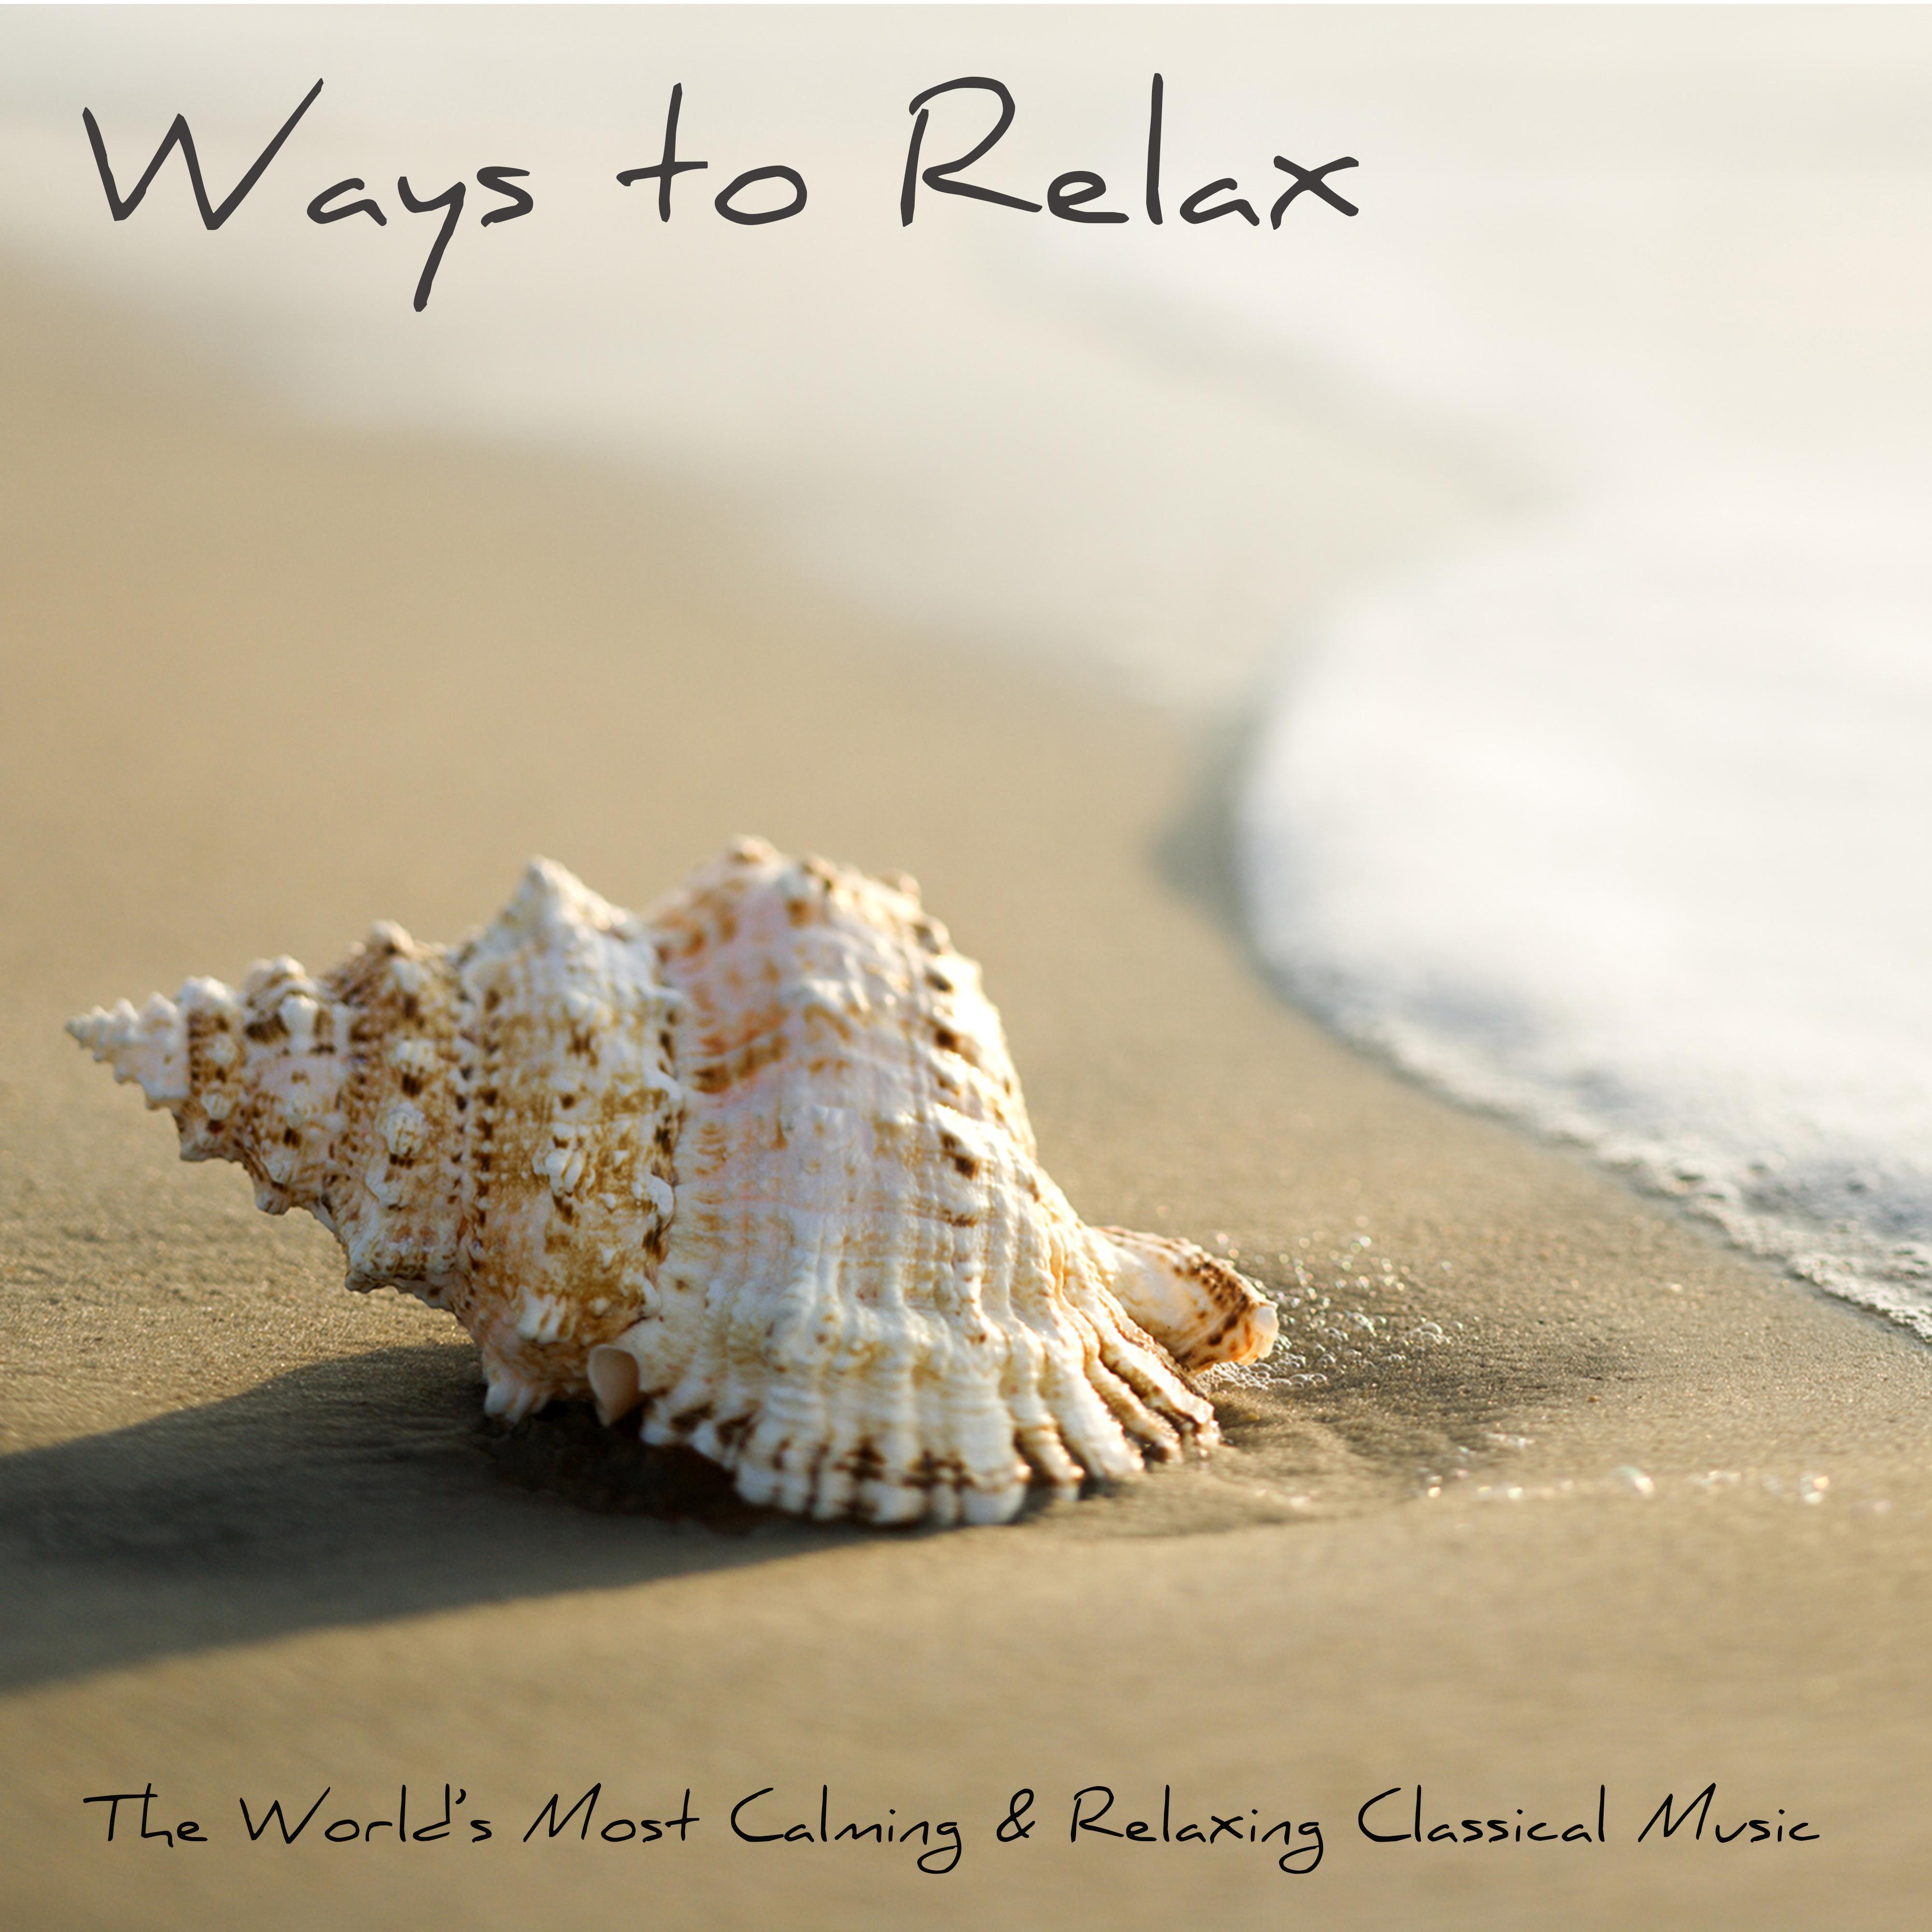 Ways to Relax - The World's Most Calming and Relaxing Classical Music for Relaxation, Meditation, Massage & Yoga